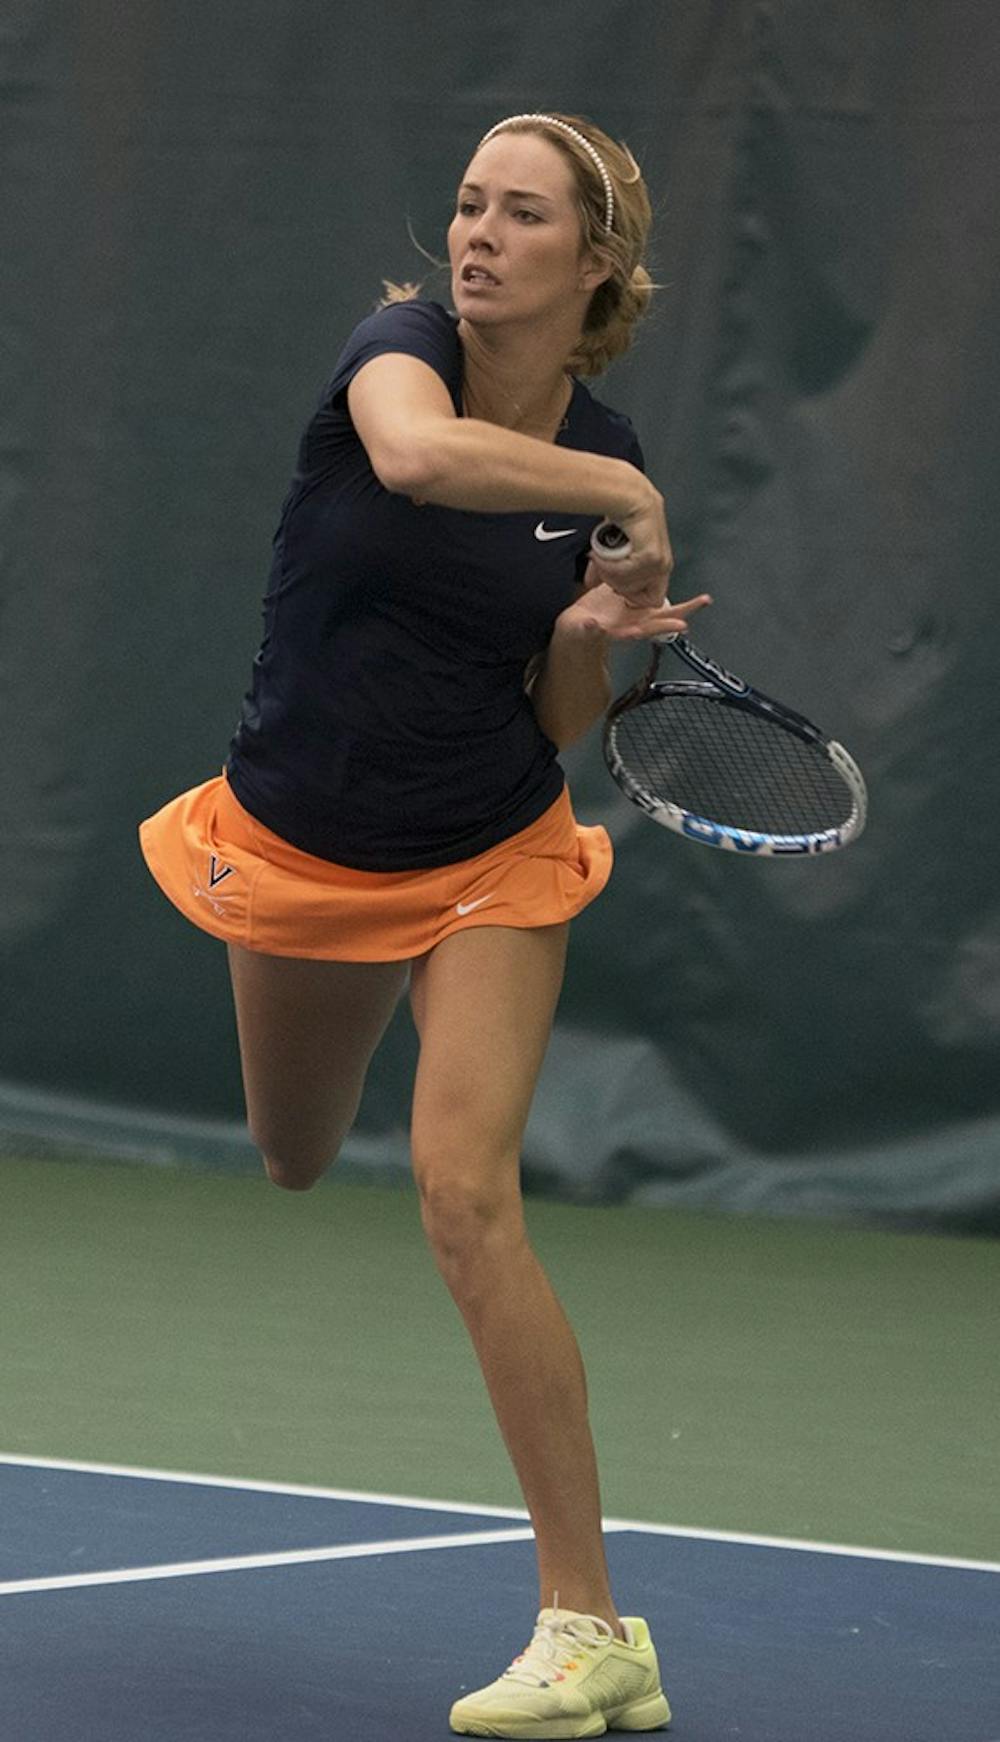 <p><font> Senior Danielle Collins shined as a leader Friday, though her team fell&nbsp;4-3 to No. 28 South Carolina. No. 4 Collins secured her singles victory in straight sets, 6-0, 6-1.</font></p>